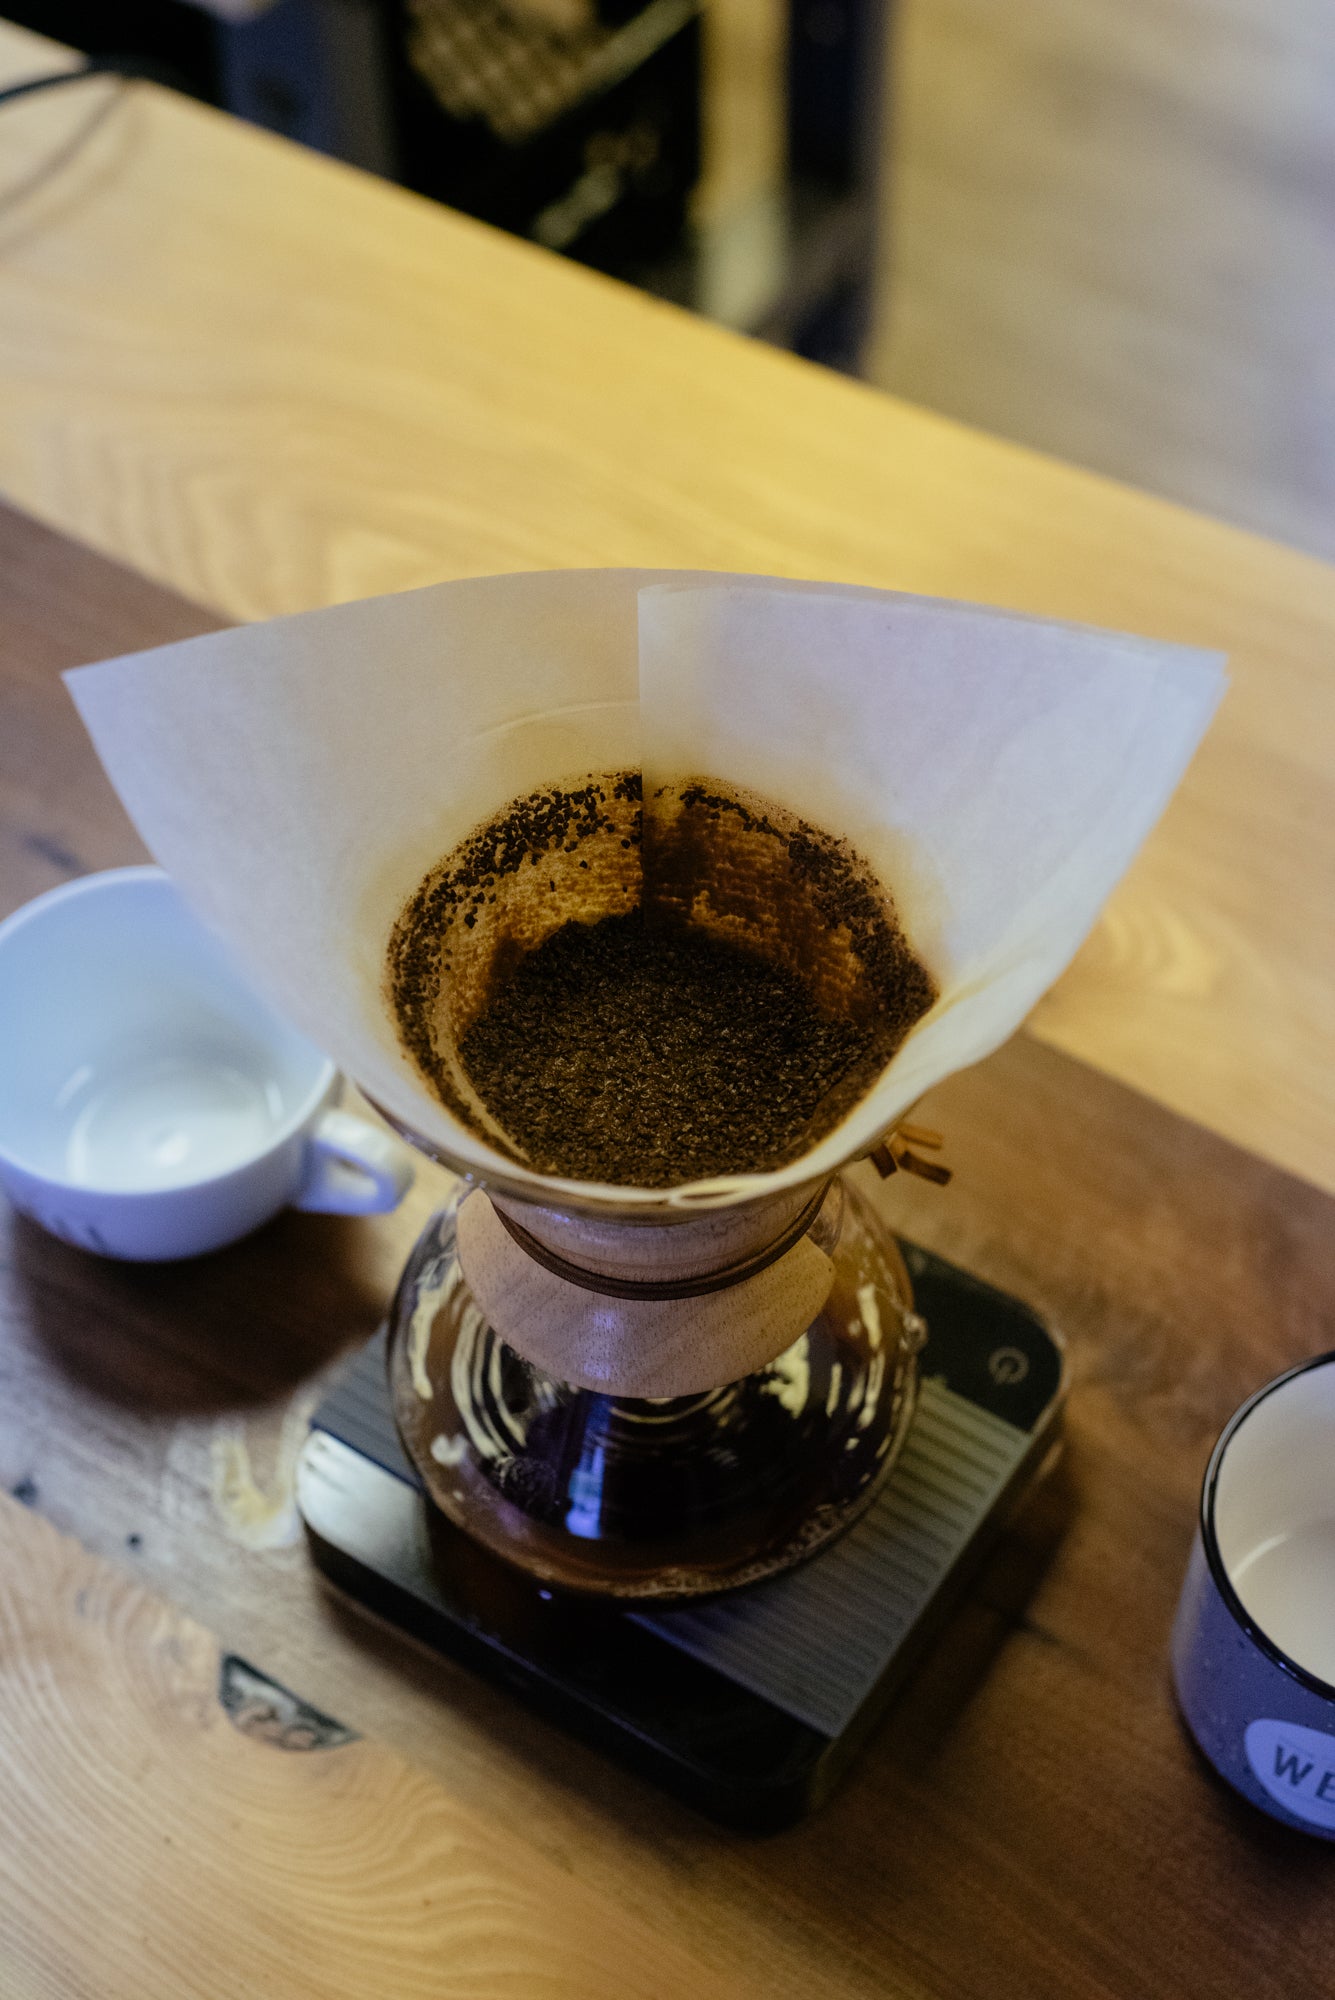 Displaying Finished Bed of Coffee After Brewing